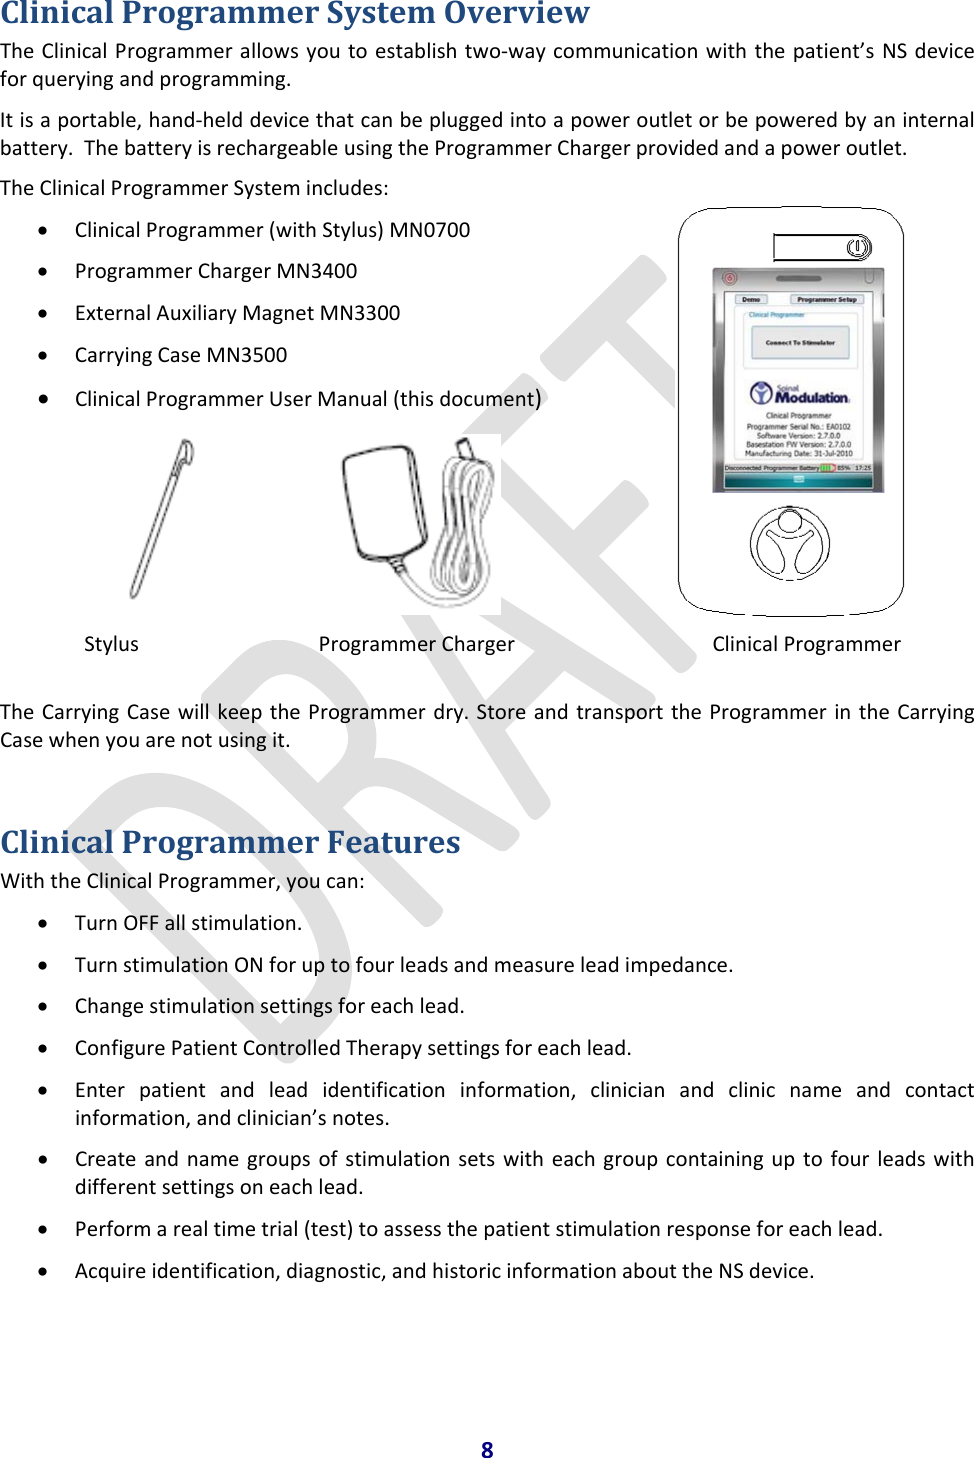 8ClinicalProgrammerSystemOverviewTheClinicalProgrammerallowsyoutoestablishtwo‐waycommunicationwiththepatient’sNSdeviceforqueryingandprogramming.Itisaportable,hand‐helddevicethatcanbepluggedintoapoweroutletorbepoweredbyaninternalbattery.ThebatteryisrechargeableusingtheProgrammerChargerprovidedandapoweroutlet.TheClinicalProgrammerSystemincludes:• ClinicalProgrammer(withStylus)MN0700• ProgrammerChargerMN3400• ExternalAuxiliaryMagnetMN3300• CarryingCaseMN3500• ClinicalProgrammerUserManual(thisdocument)   Stylus ProgrammerChargerClinicalProgrammerTheCarryingCasewillkeeptheProgrammerdry.StoreandtransporttheProgrammerintheCarryingCasewhenyouarenotusingit.ClinicalProgrammerFeaturesWiththeClinicalProgrammer,youcan:• TurnOFFallstimulation.• TurnstimulationONforuptofourleadsandmeasureleadimpedance.• Changestimulationsettingsforeachlead.• ConfigurePatientControlledTherapysettingsforeachlead.• Enterpatientandleadidentificationinformation,clinicianandclinicnameandcontactinformation,andclinician’snotes.• Createandnamegroupsofstimulationsetswitheachgroupcontaininguptofourleadswithdifferentsettingsoneachlead.• Performarealtimetrial(test)toassessthepatientstimulationresponseforeachlead.• Acquireidentification,diagnostic,andhistoricinformationabouttheNSdevice.